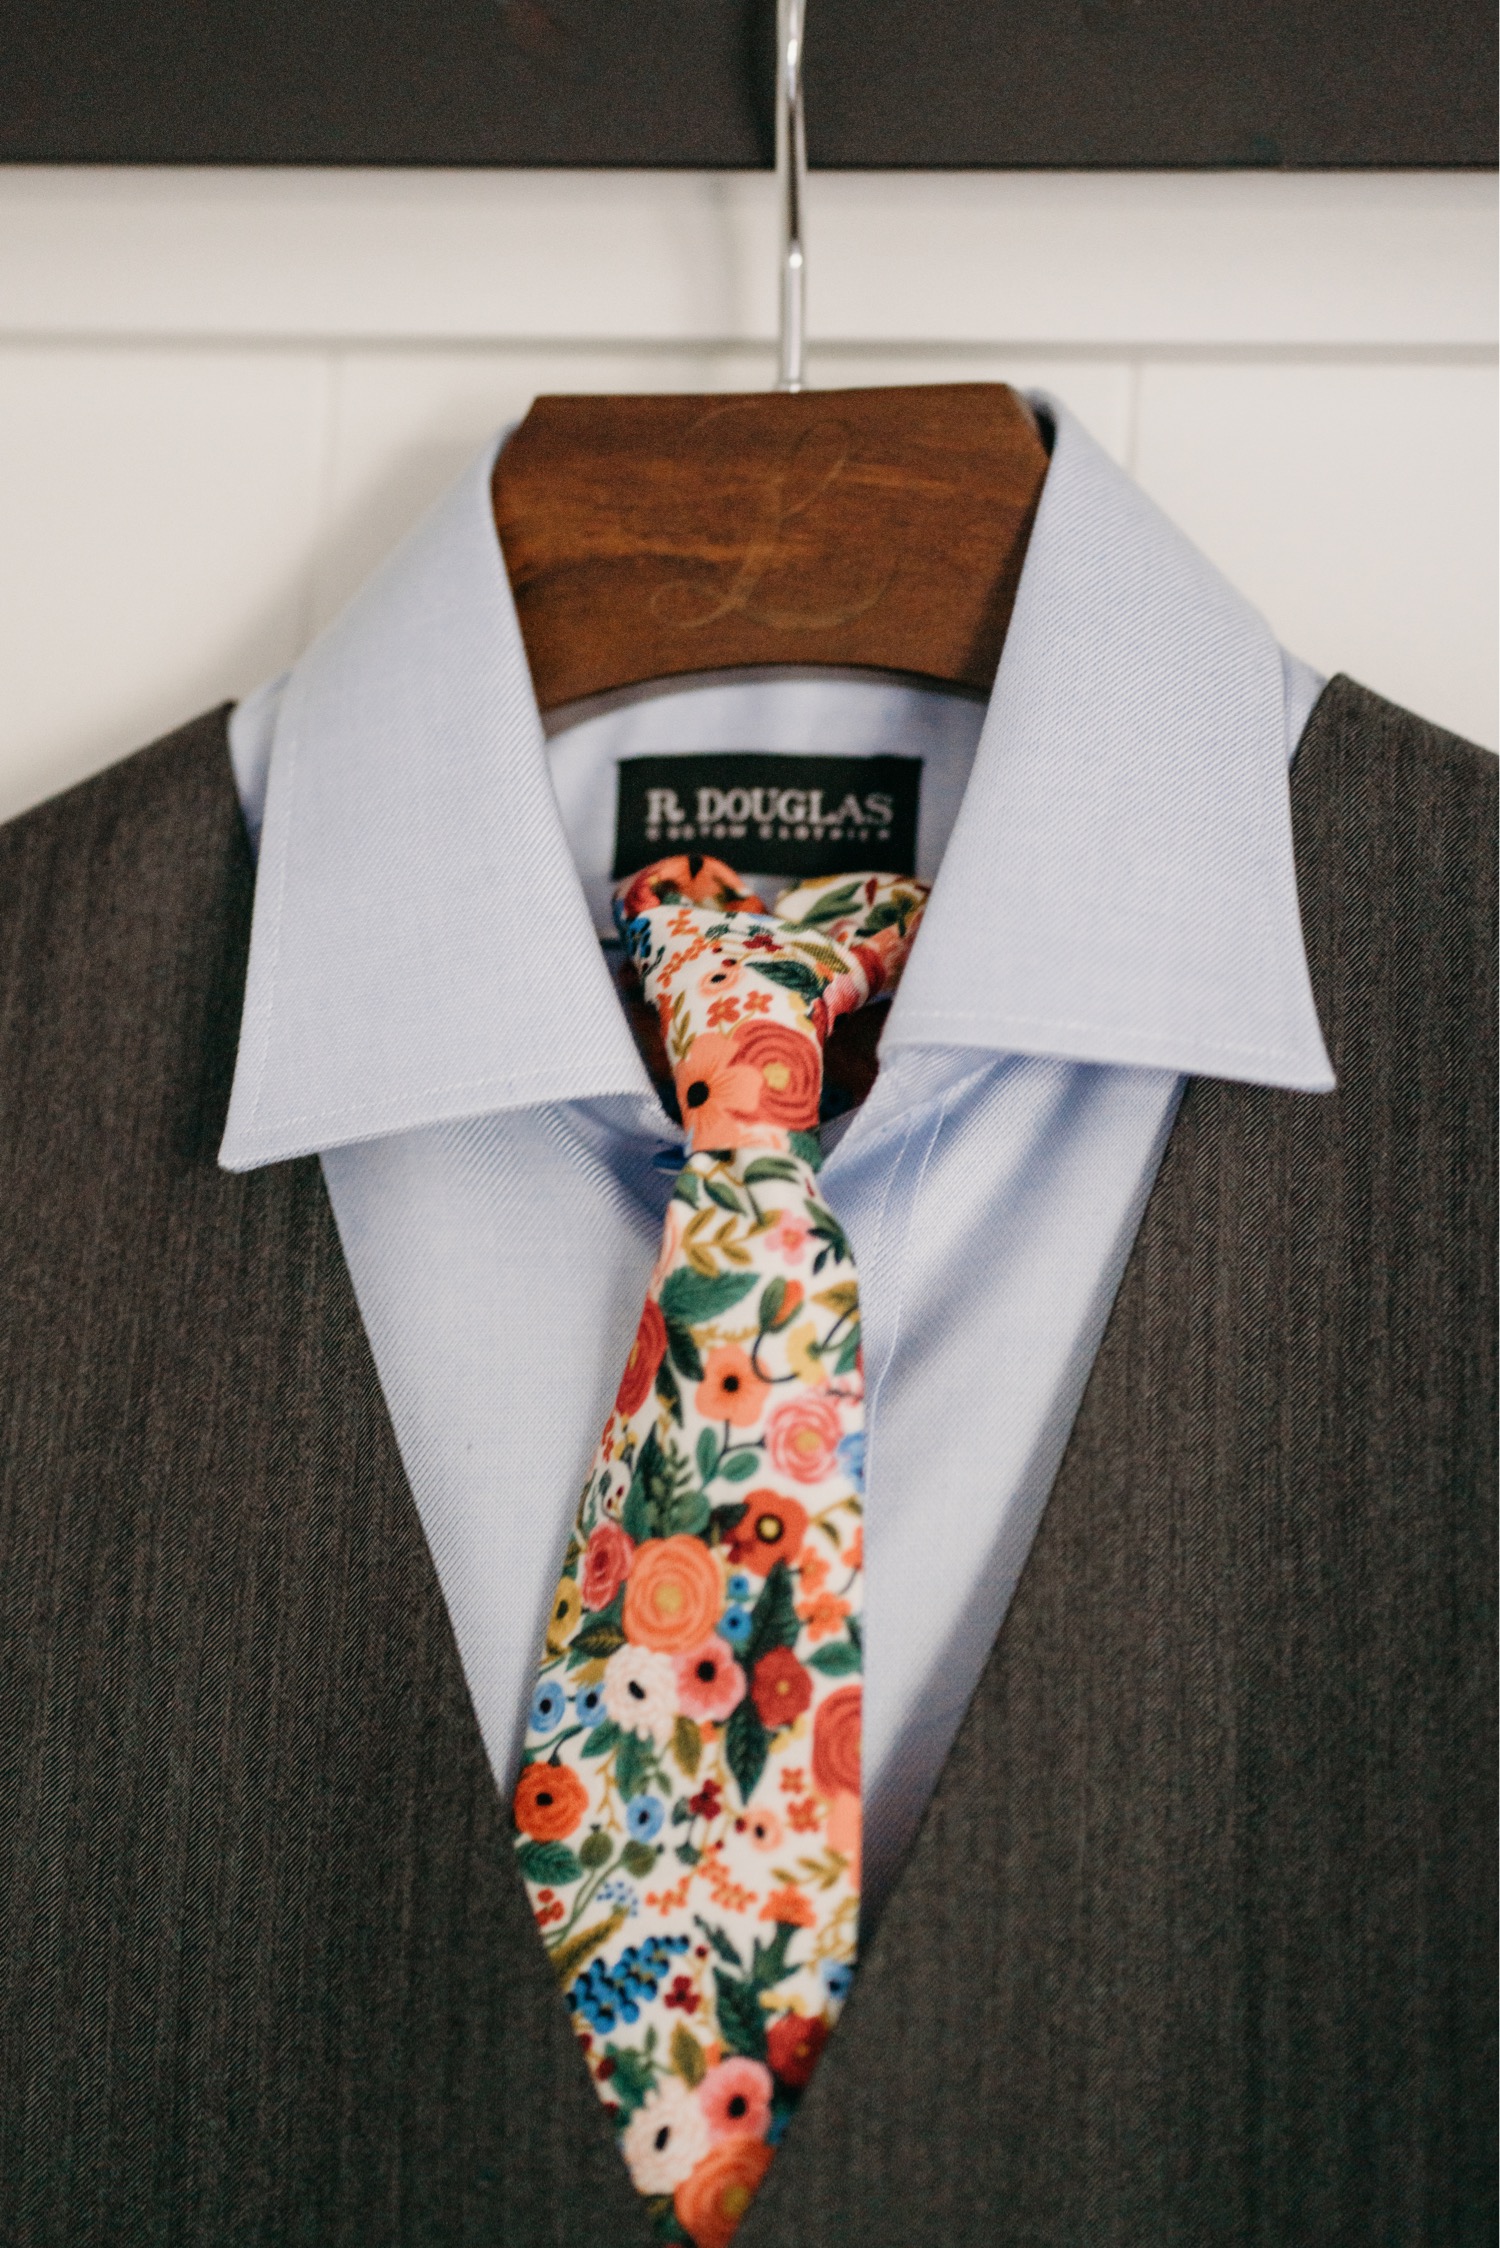 Suit with floral tie on a hanger.